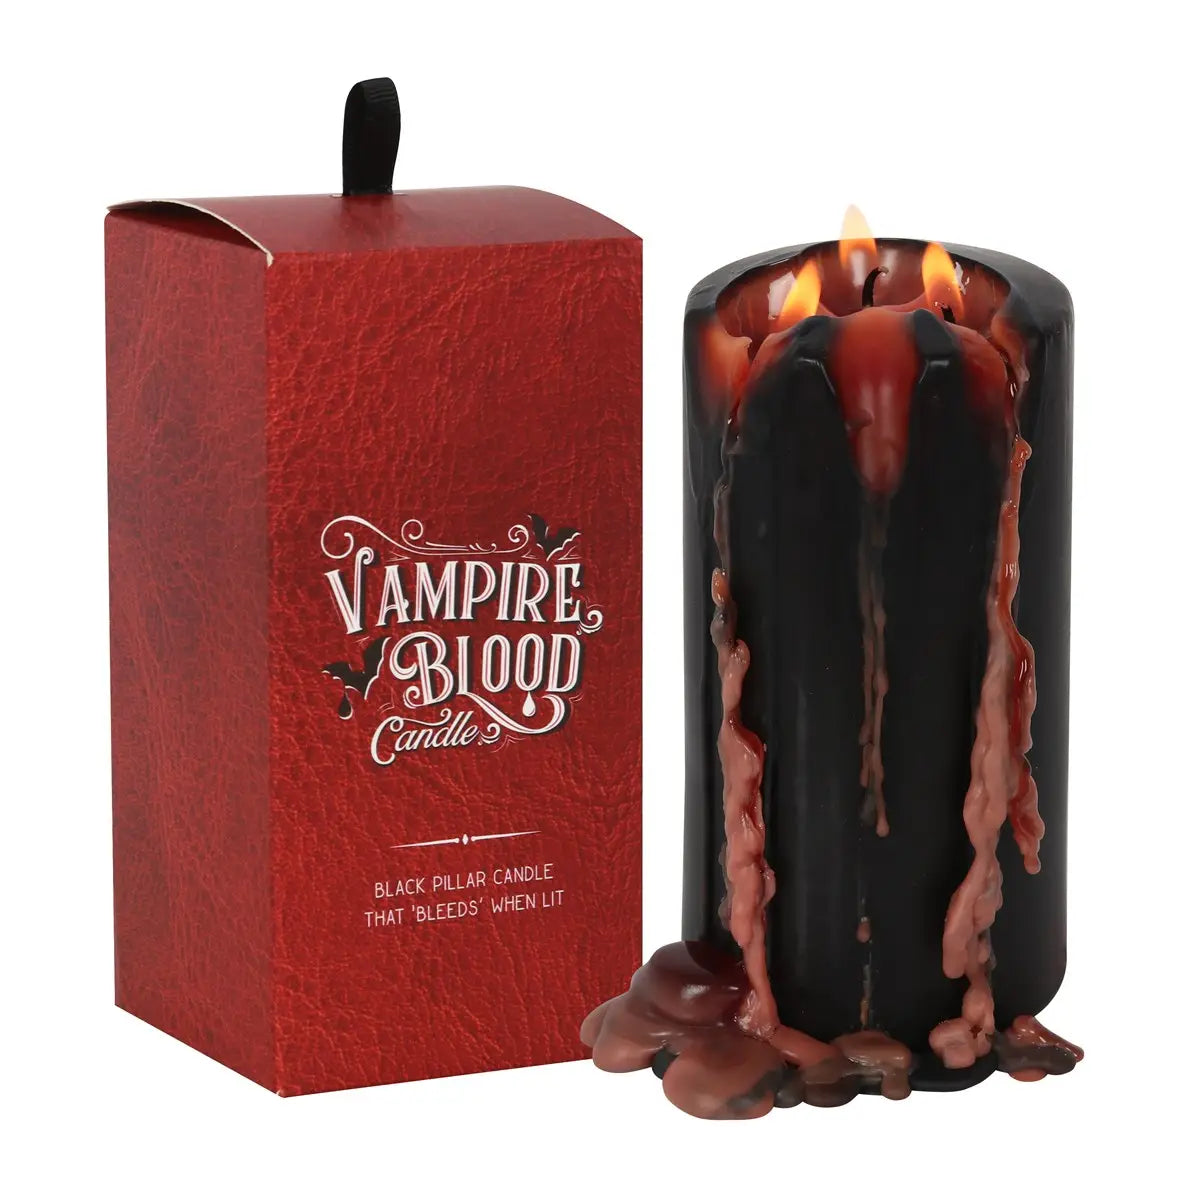 A large black pillar candle that drips bloody red when lit. Shown next to its gift box packaging